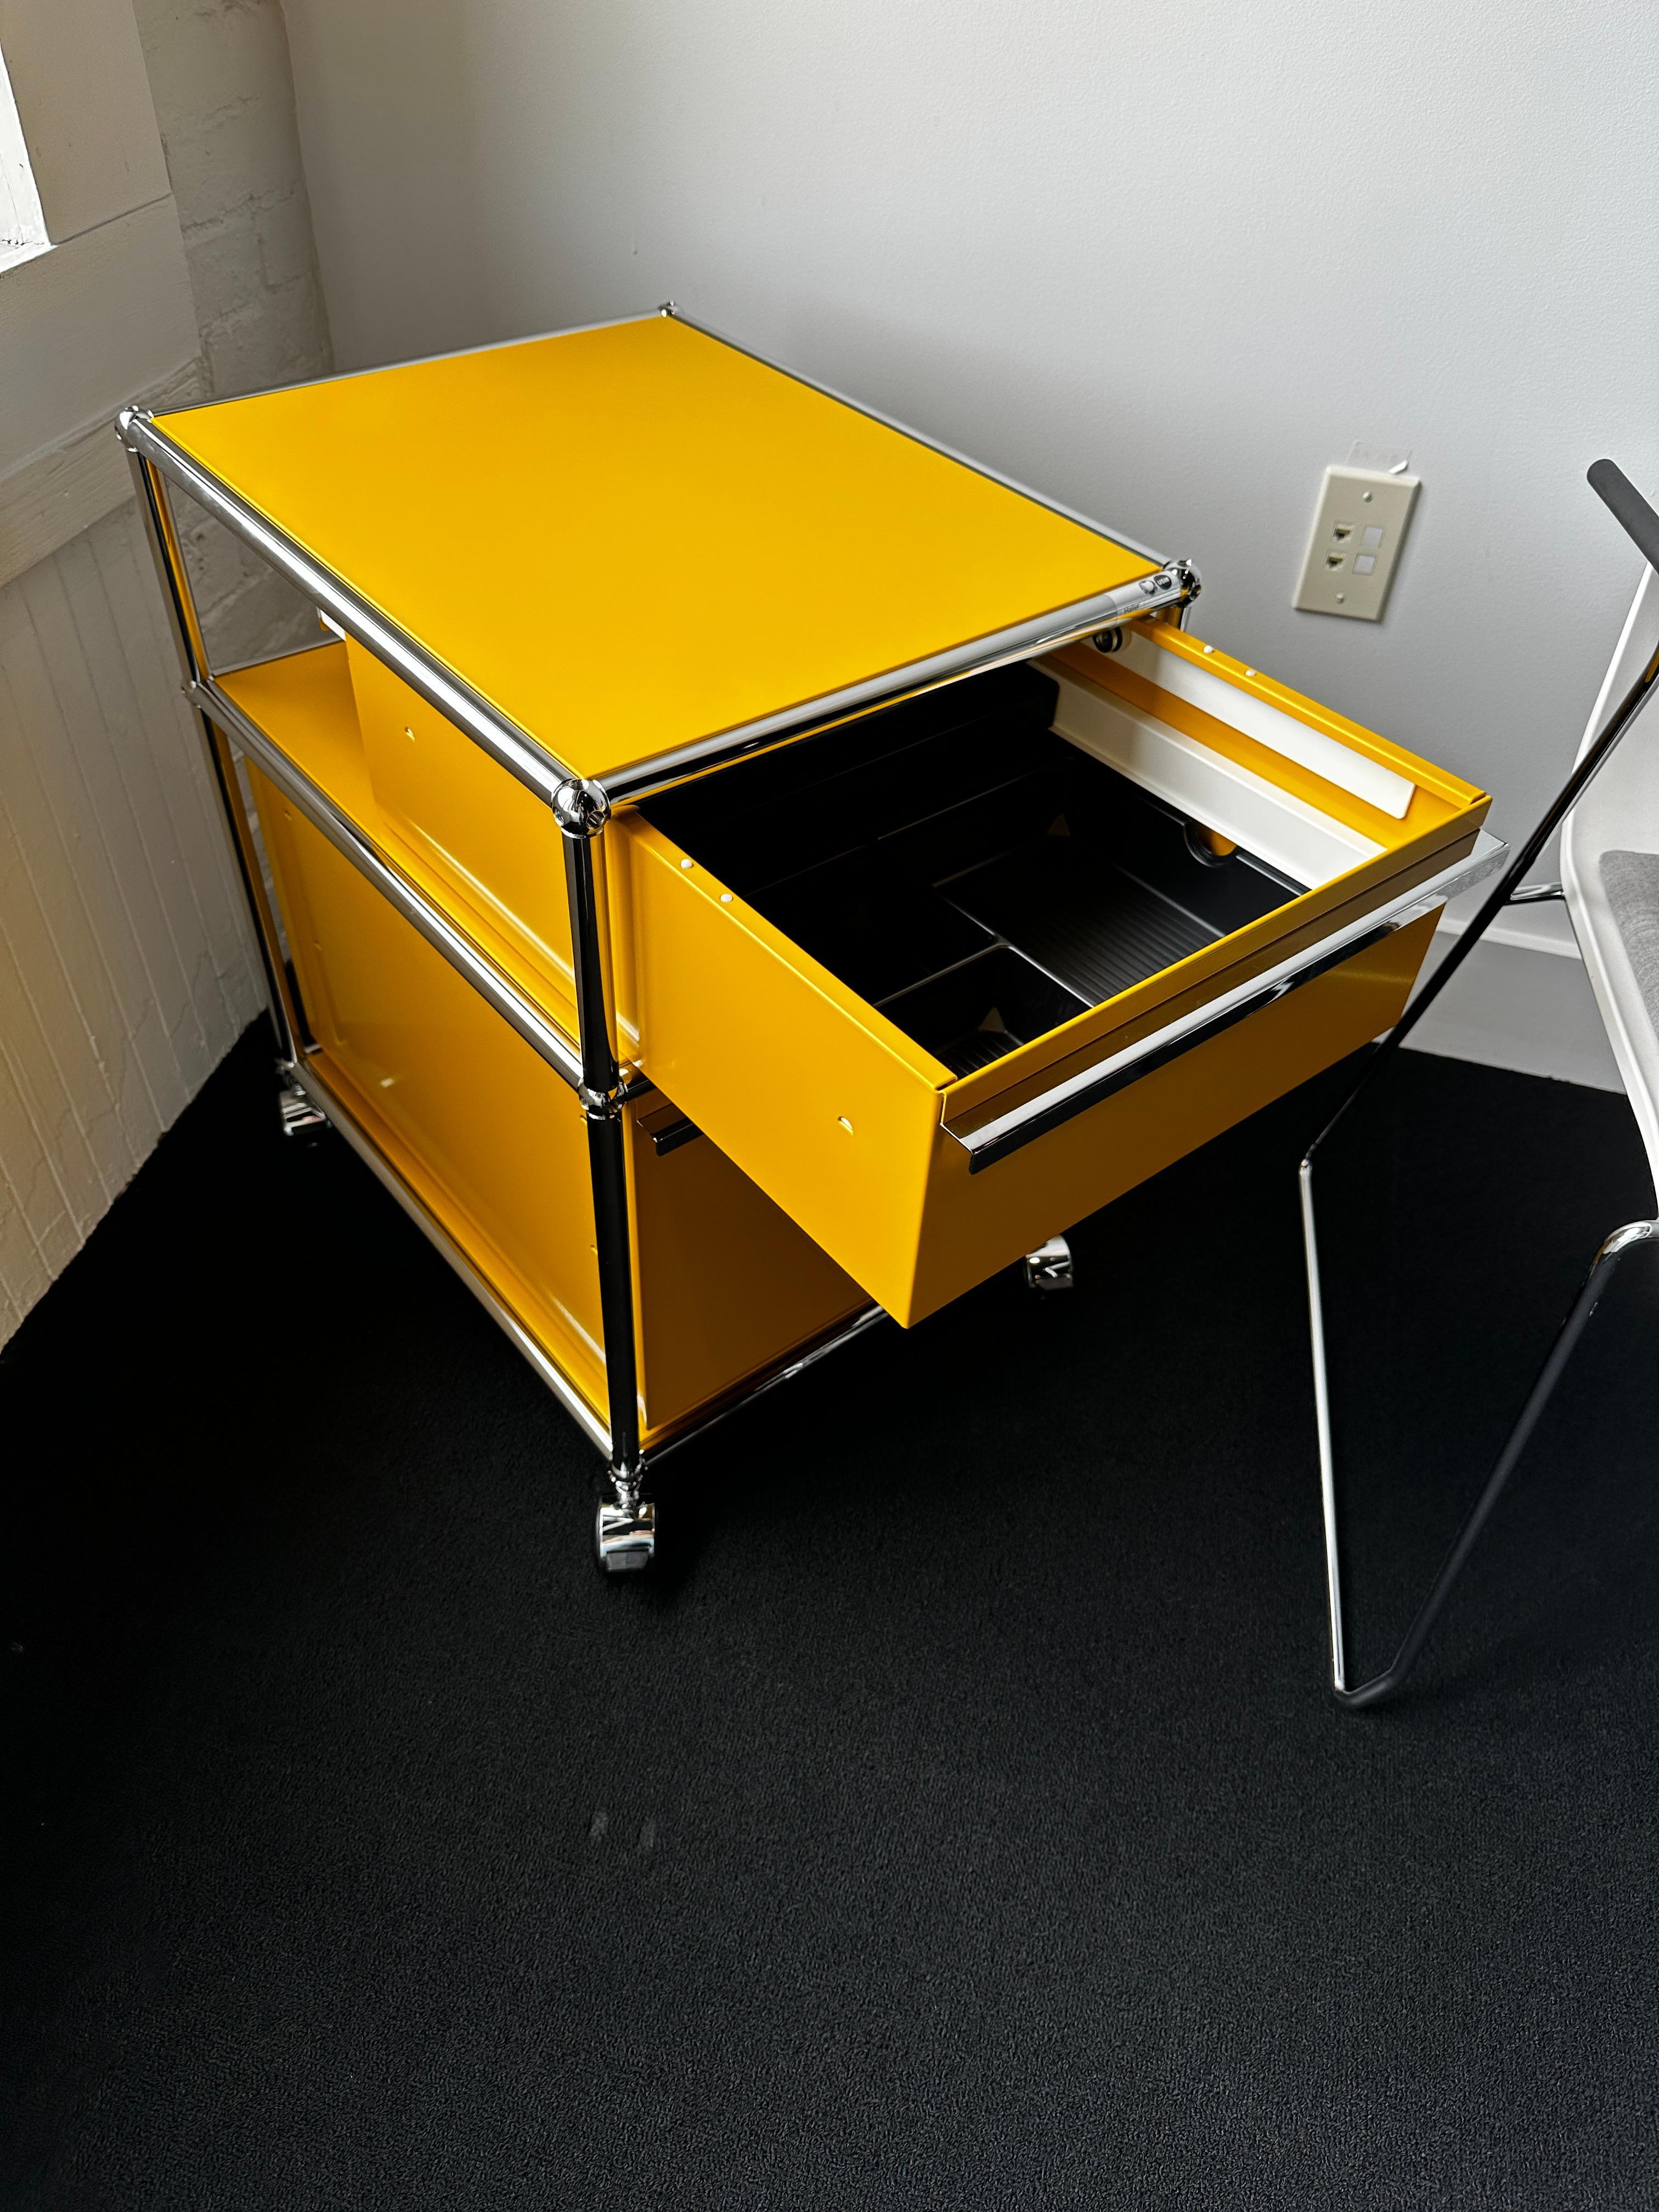 Offered by M2L.
It has top drawer inserts
LxDxH: 523x418x605 mm
Material: metal
Colour: golden yellow
2x open compartment
2x compartment incl. drawer with handle (without lock)
incl. castor, soft
With one drop down door. Designed by Swiss architect